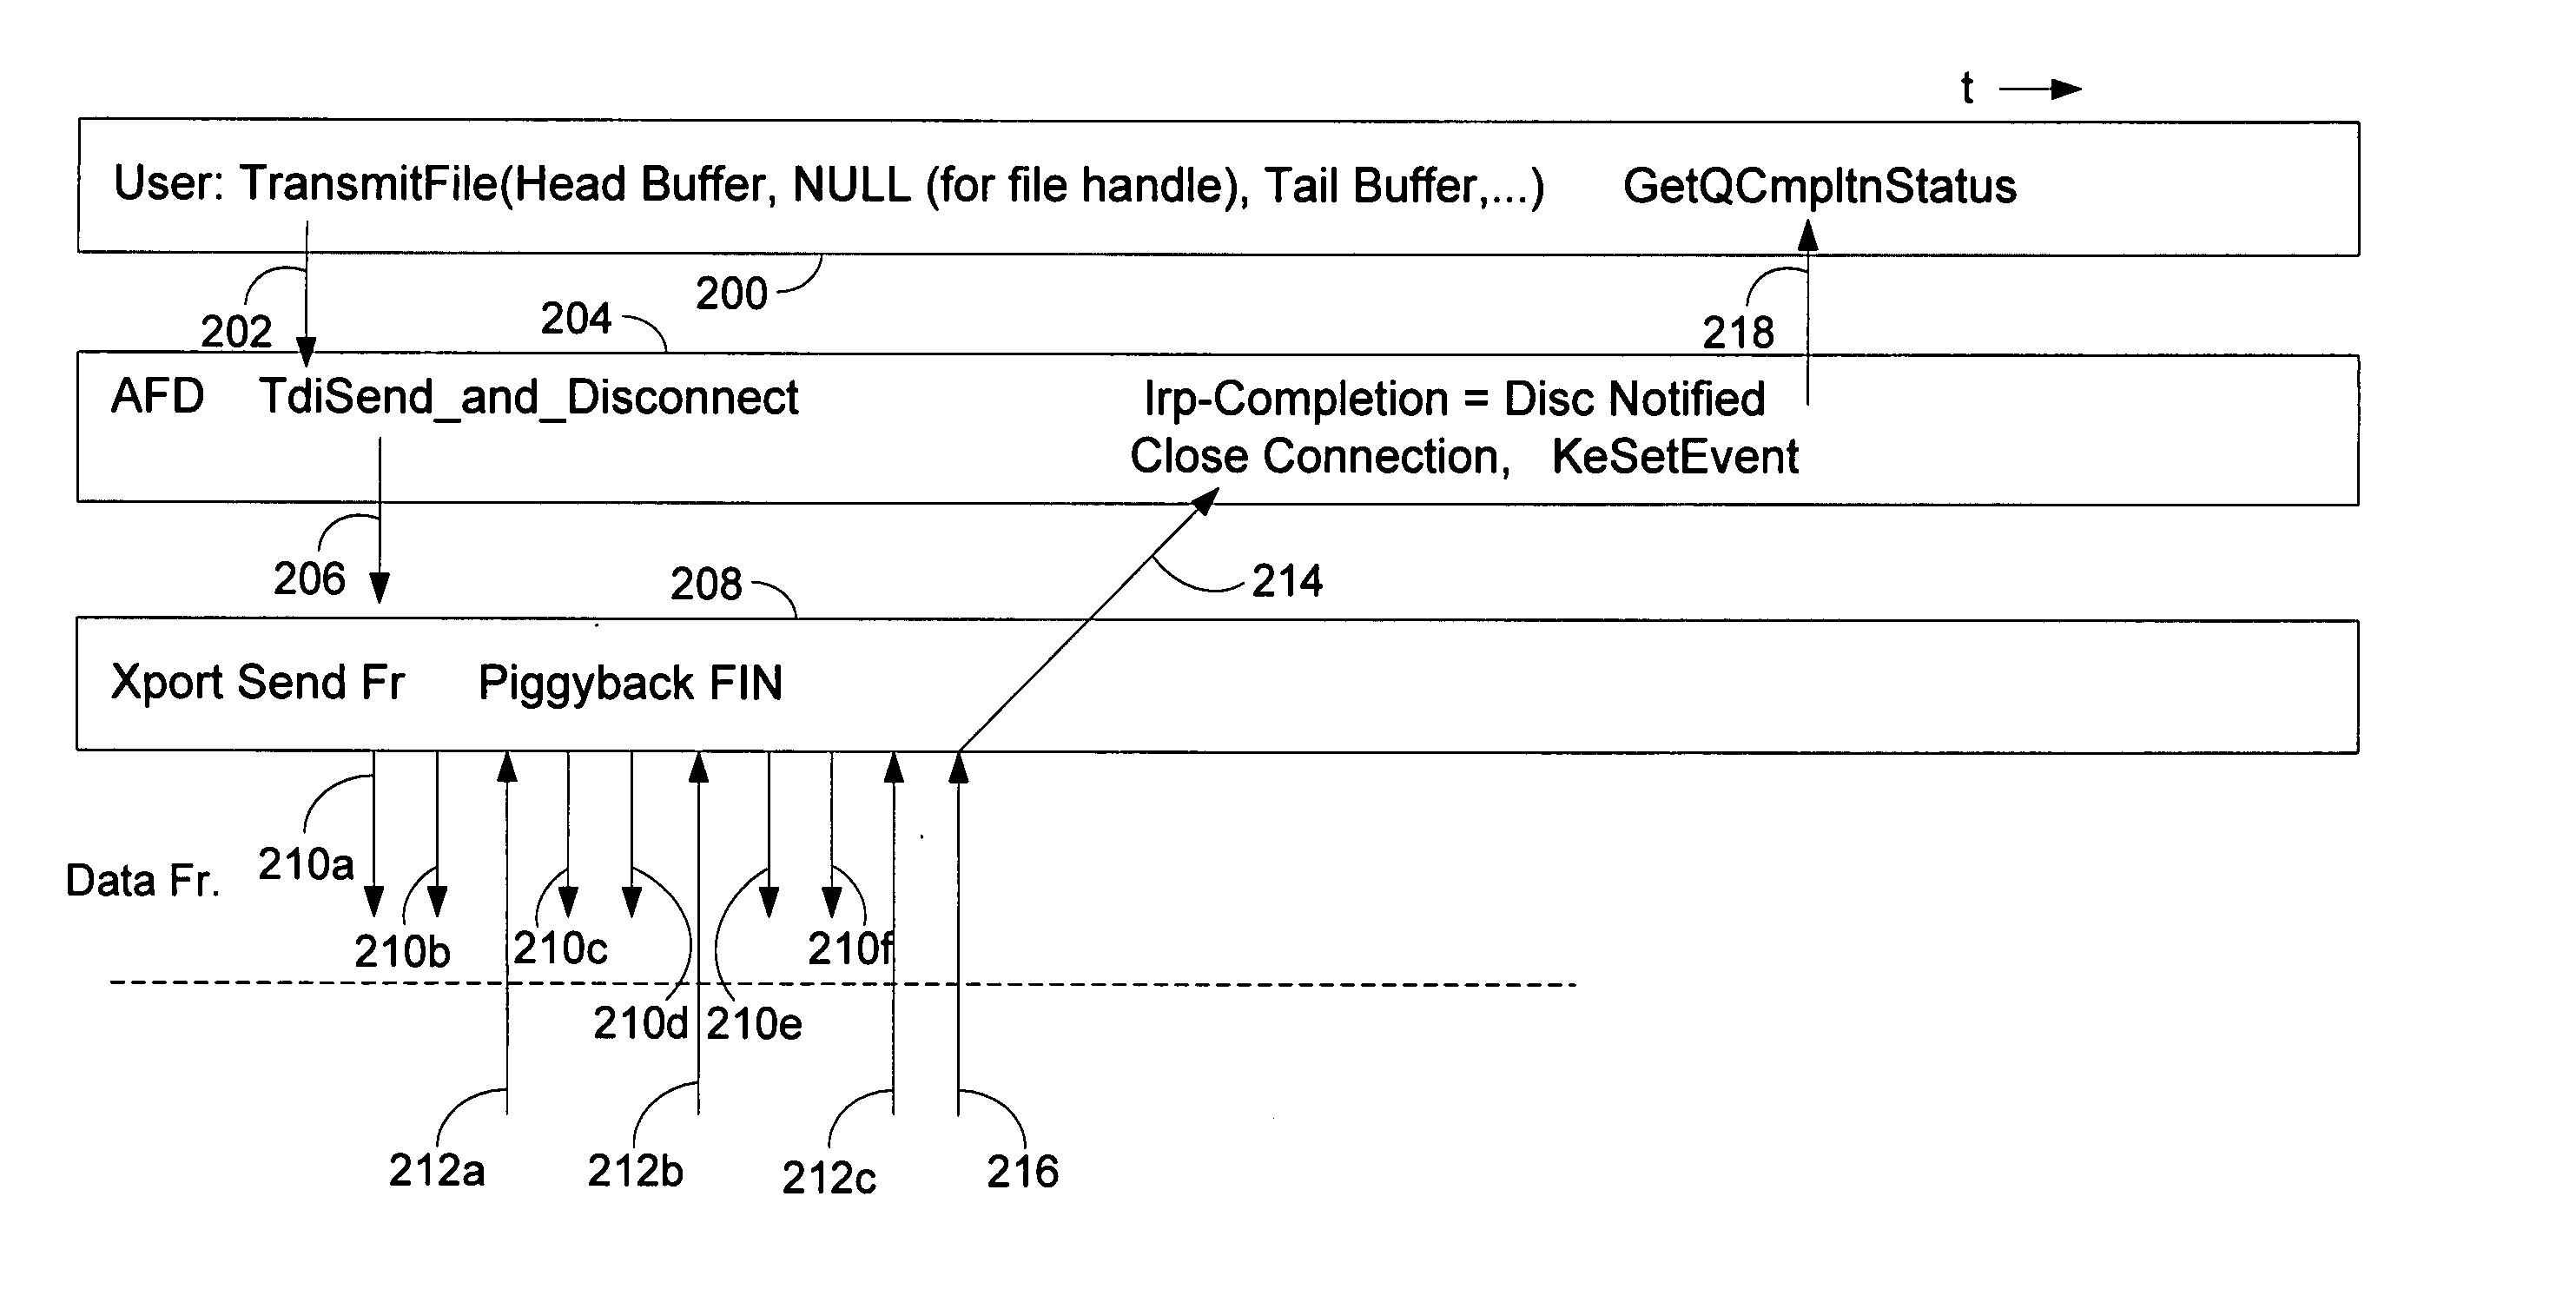 System and method of enhancing web server throughput in single and multiple processor systems